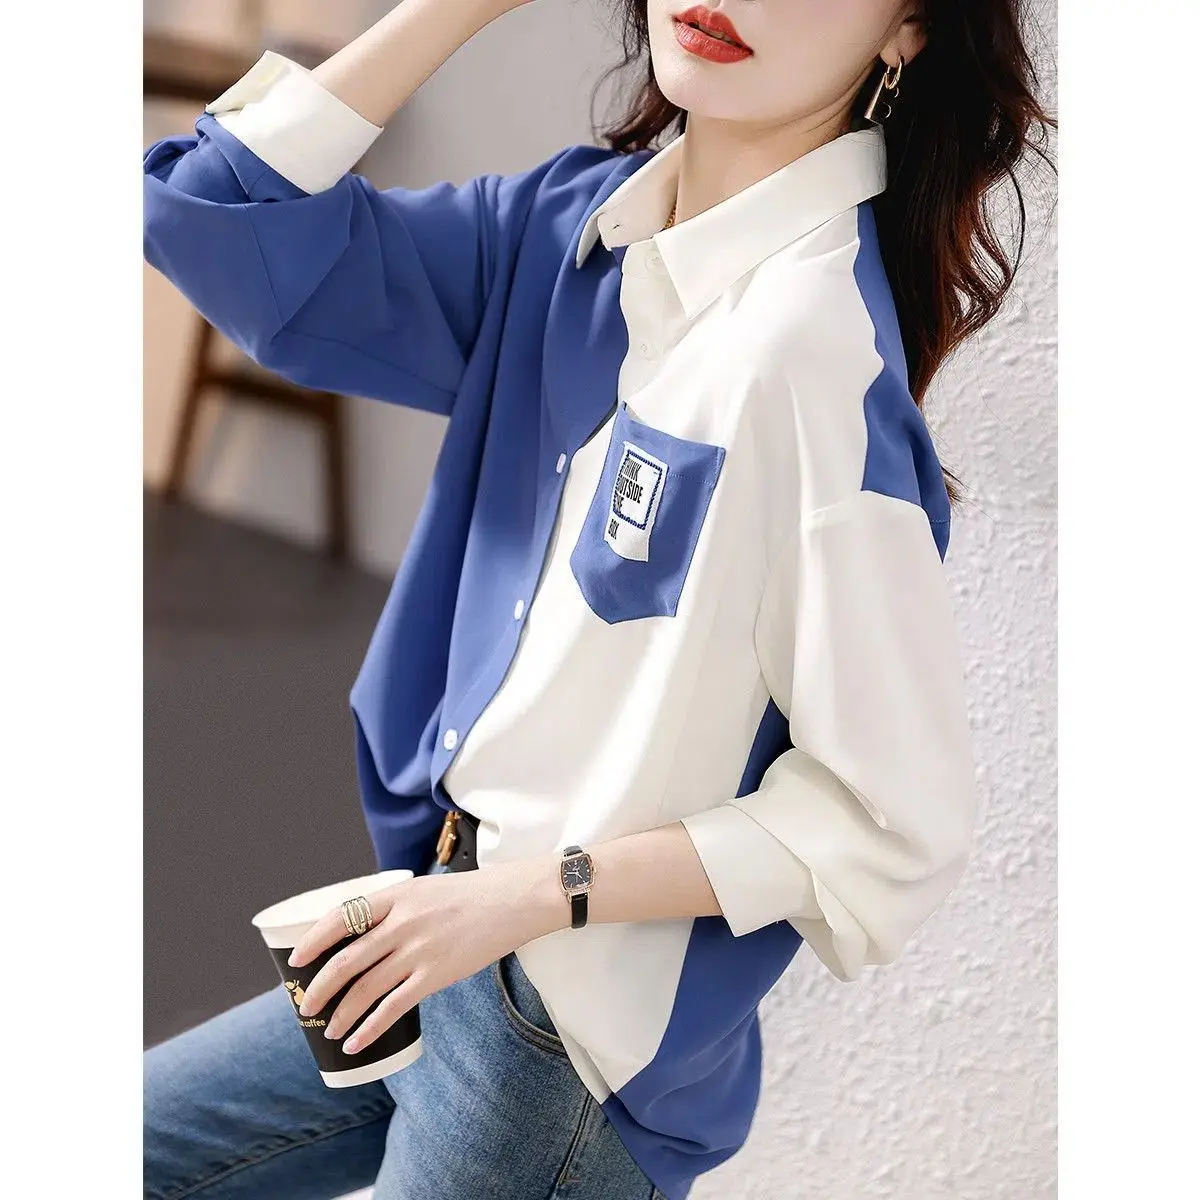 Spring Korean Fashion Blue White Contrast Shirt Ladies Casual Loose Simple All-match Top Printed Pocket Female Clothes Blouse